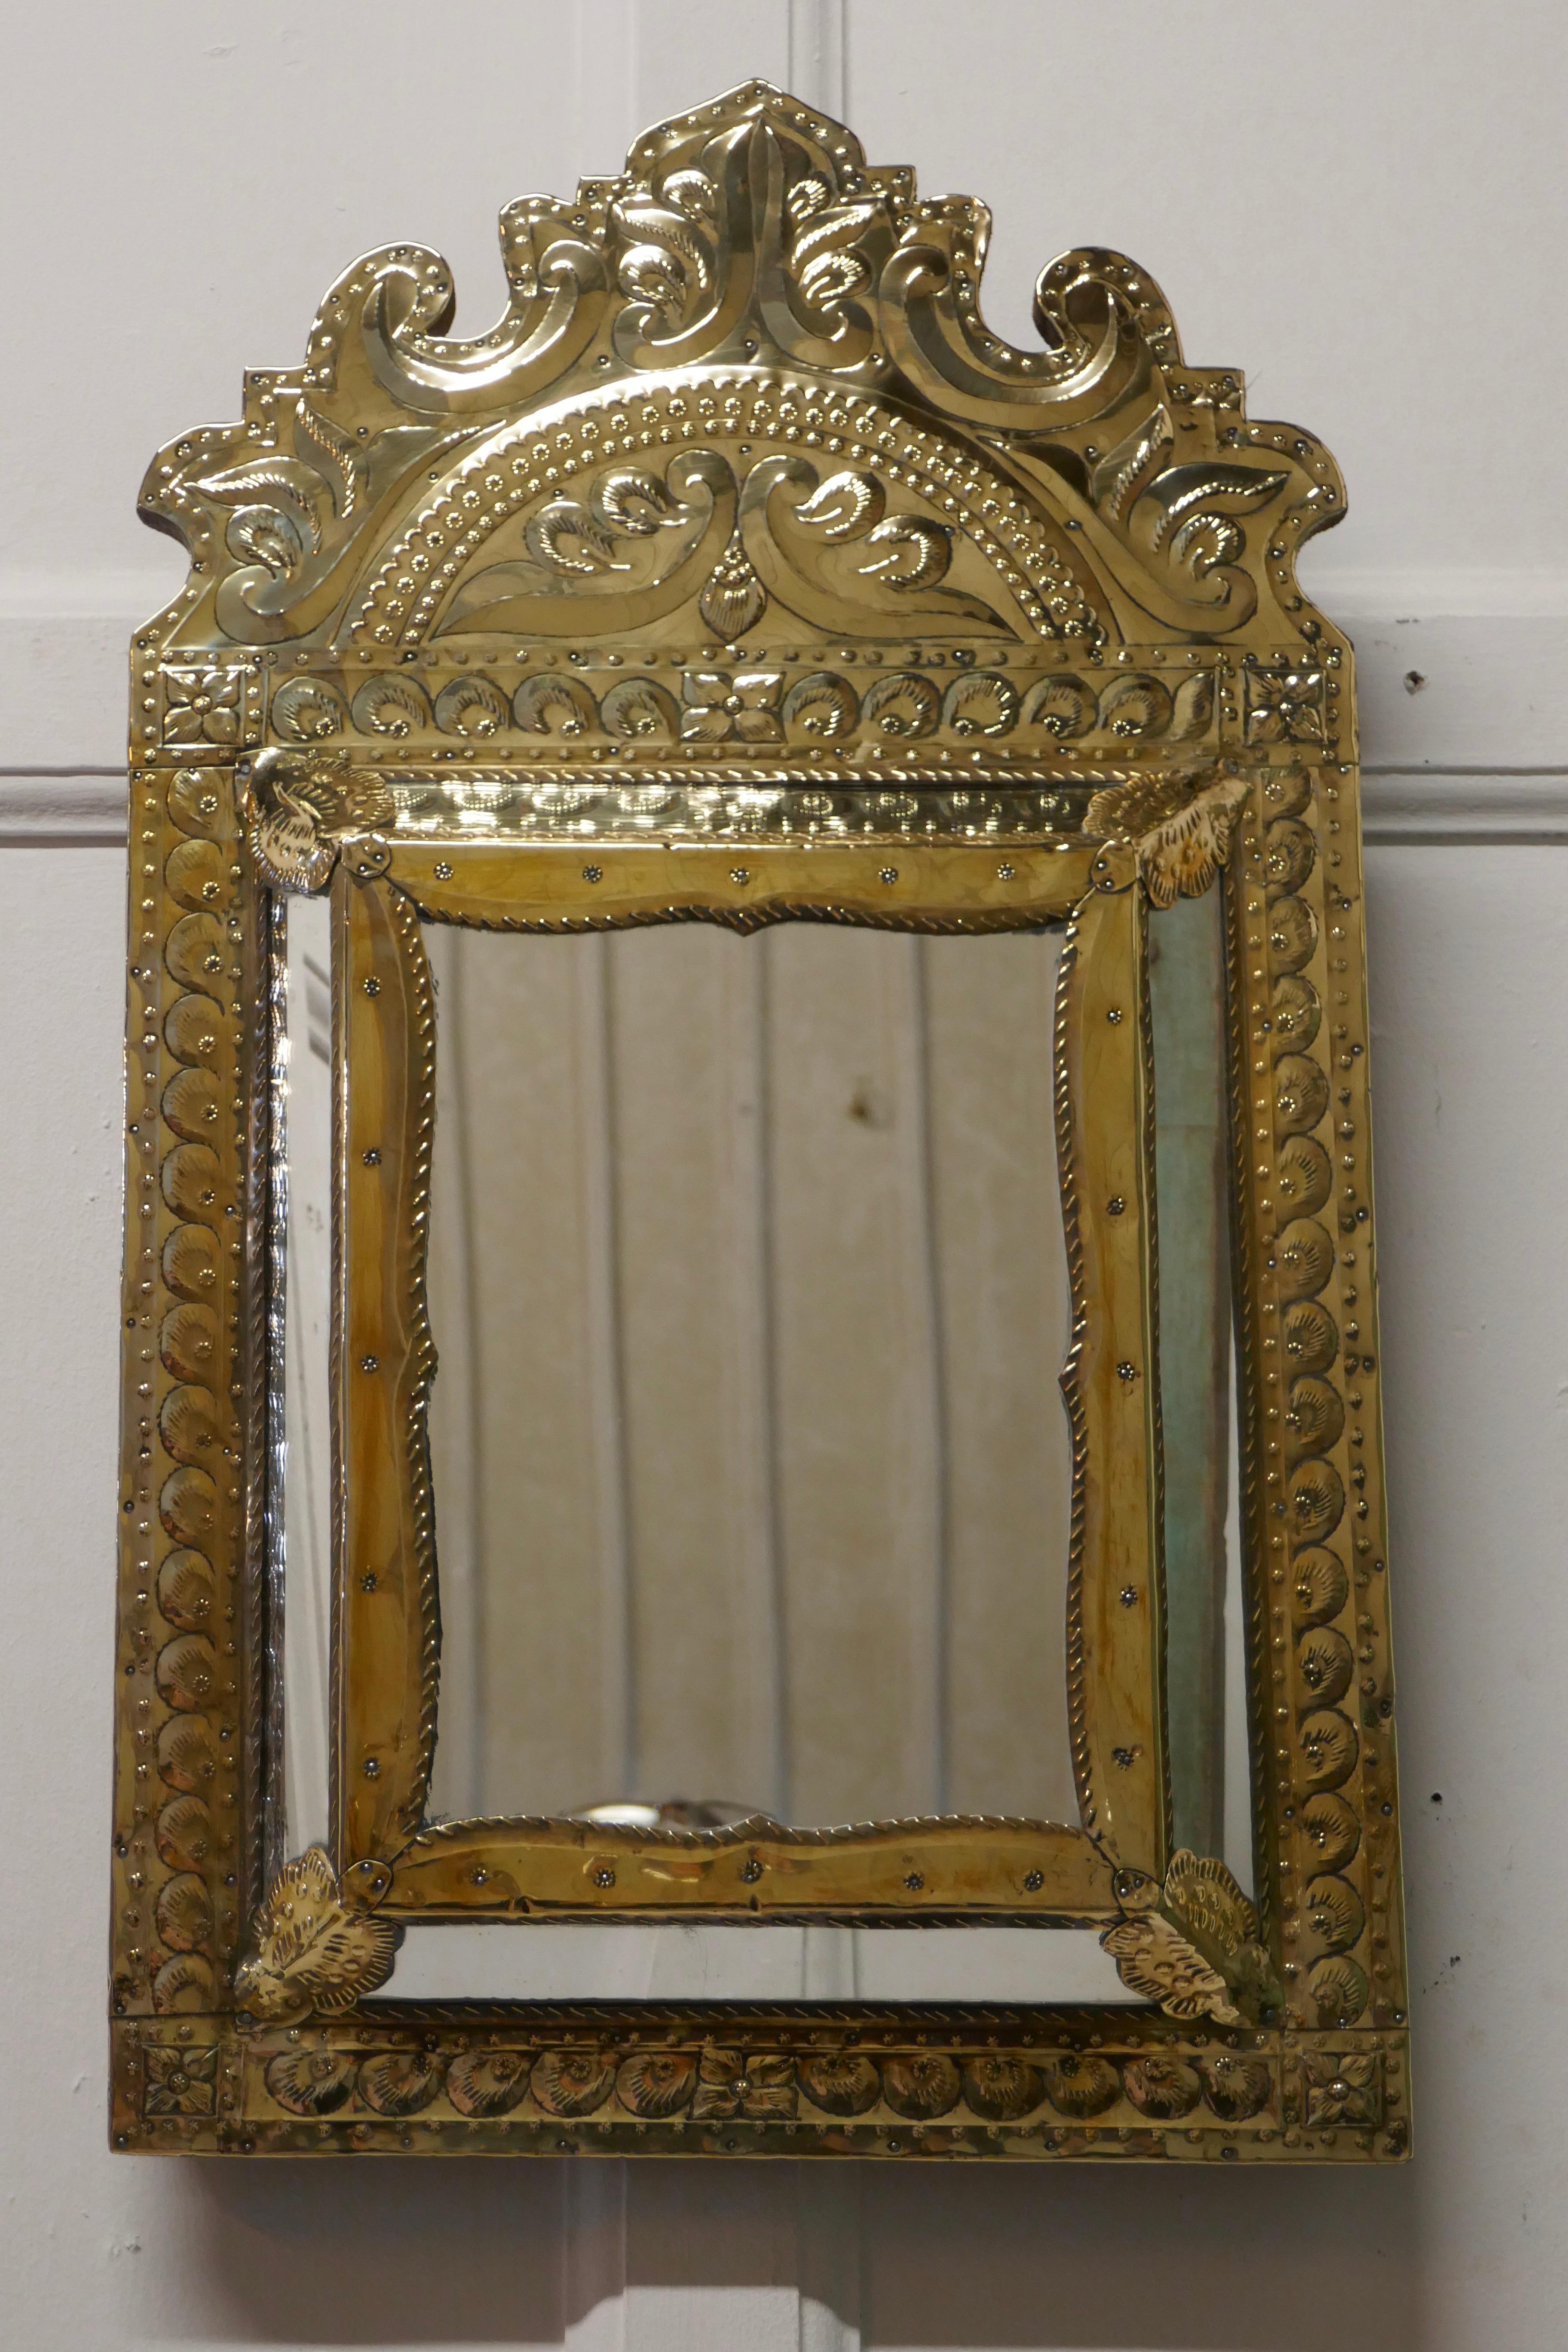 Napoleon III French brass cushion mirror

The hand beaten brass frame has a North African style of decoration, both the mirror and frame are in good condition
The mirrors are all original, the mirror has solid wooden back
The mirror frame is 3”